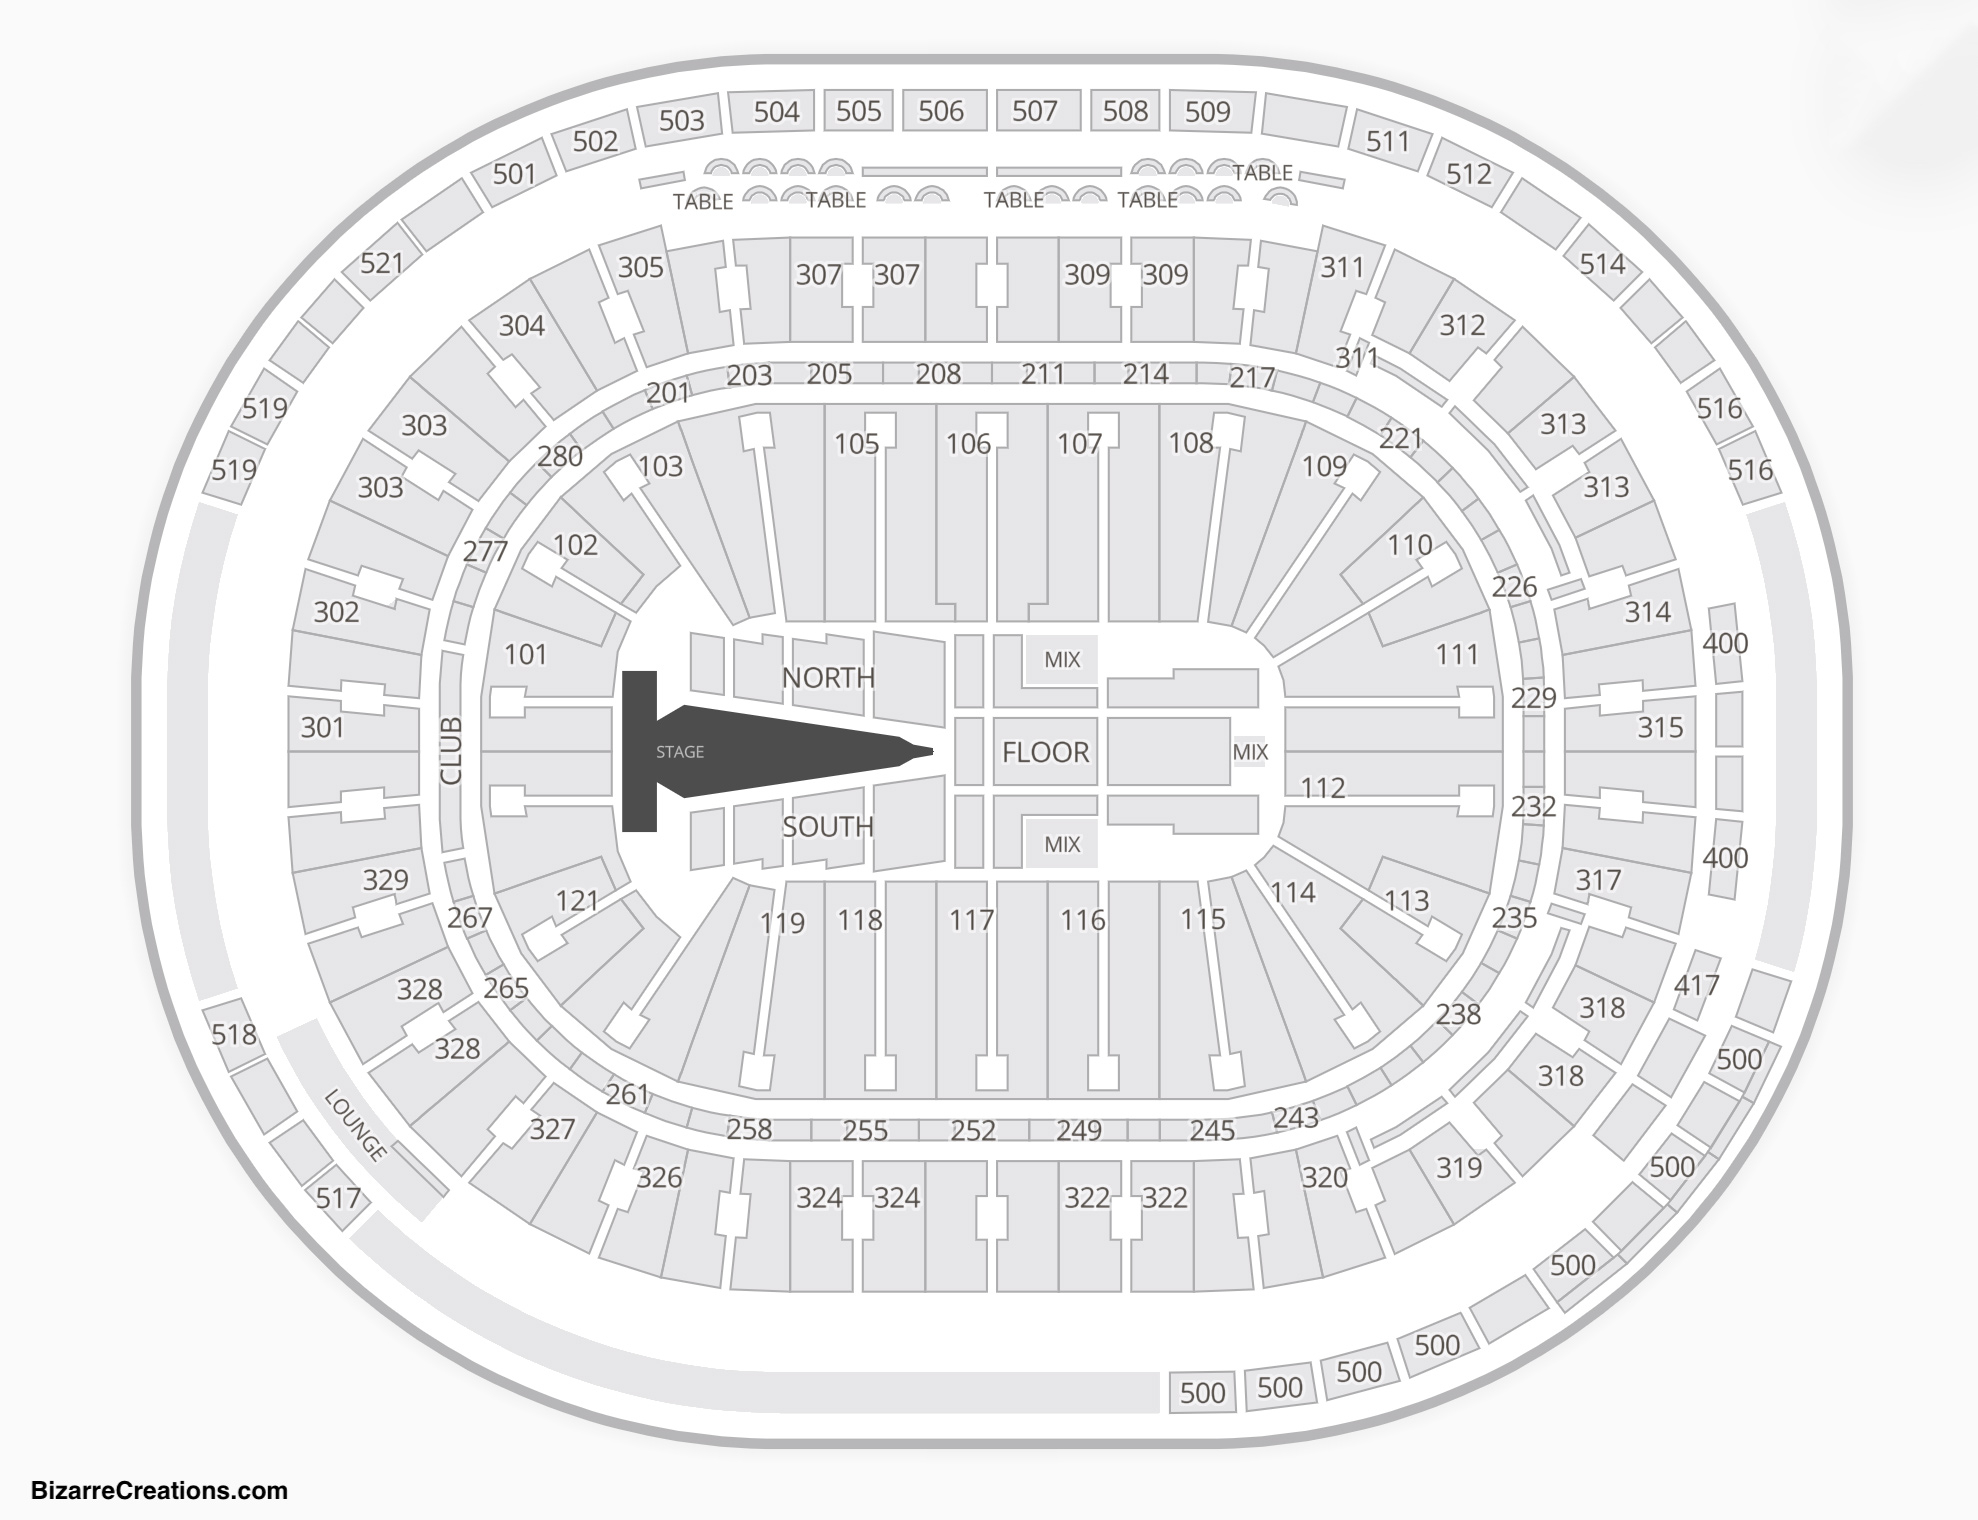 Rogers Arena Seating Charts Views Games Answers Cheats